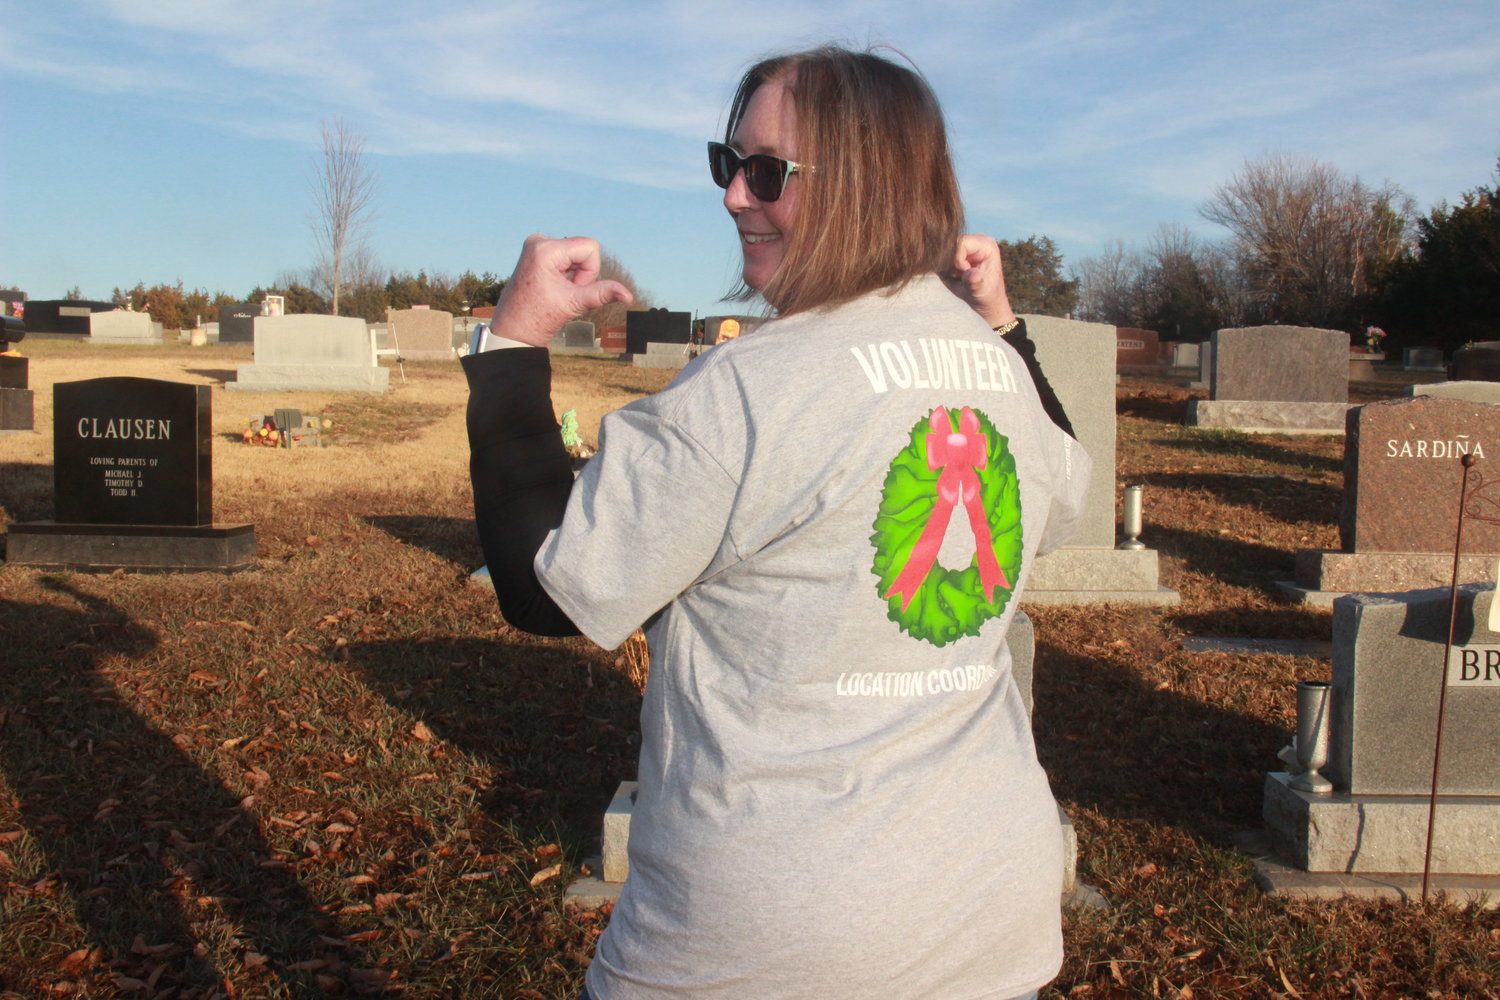 DEDICATED VOLUNTER — Andrea Romaker demonstrates the volunteer shirt given to those who help with the Wreaths Across America initiative. Romaker is the local coordinator who arranges for the memorial effort to be brought to the Warrenton City Cemetery and Holy Rosary Cemetery.